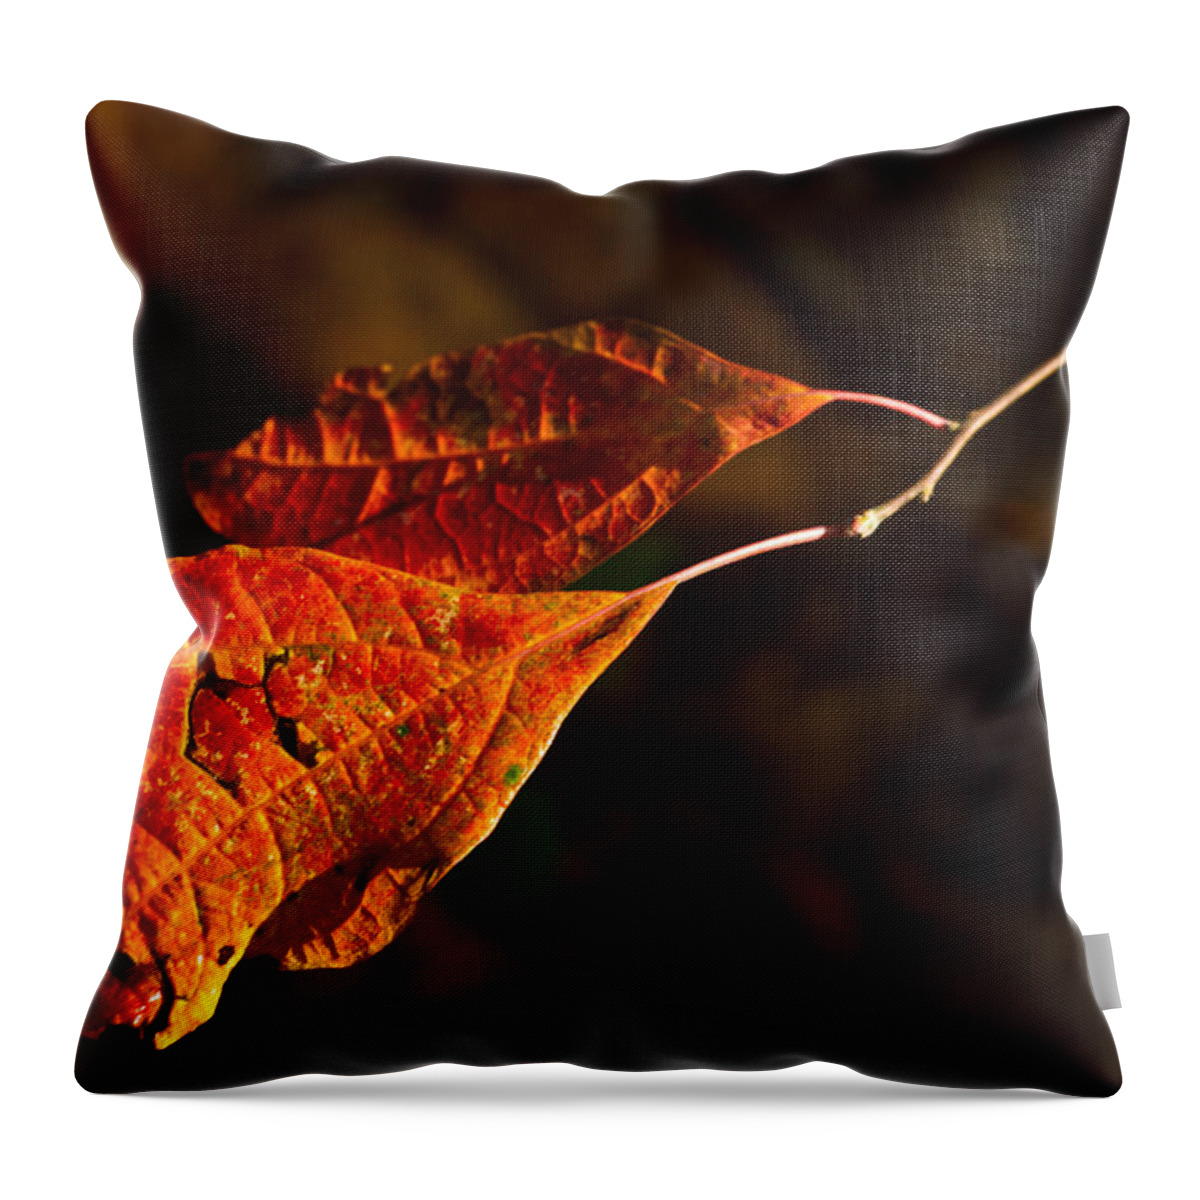 Sassafras Throw Pillow featuring the photograph Sassafras Leaves in With Fall Colors by Douglas Barnett